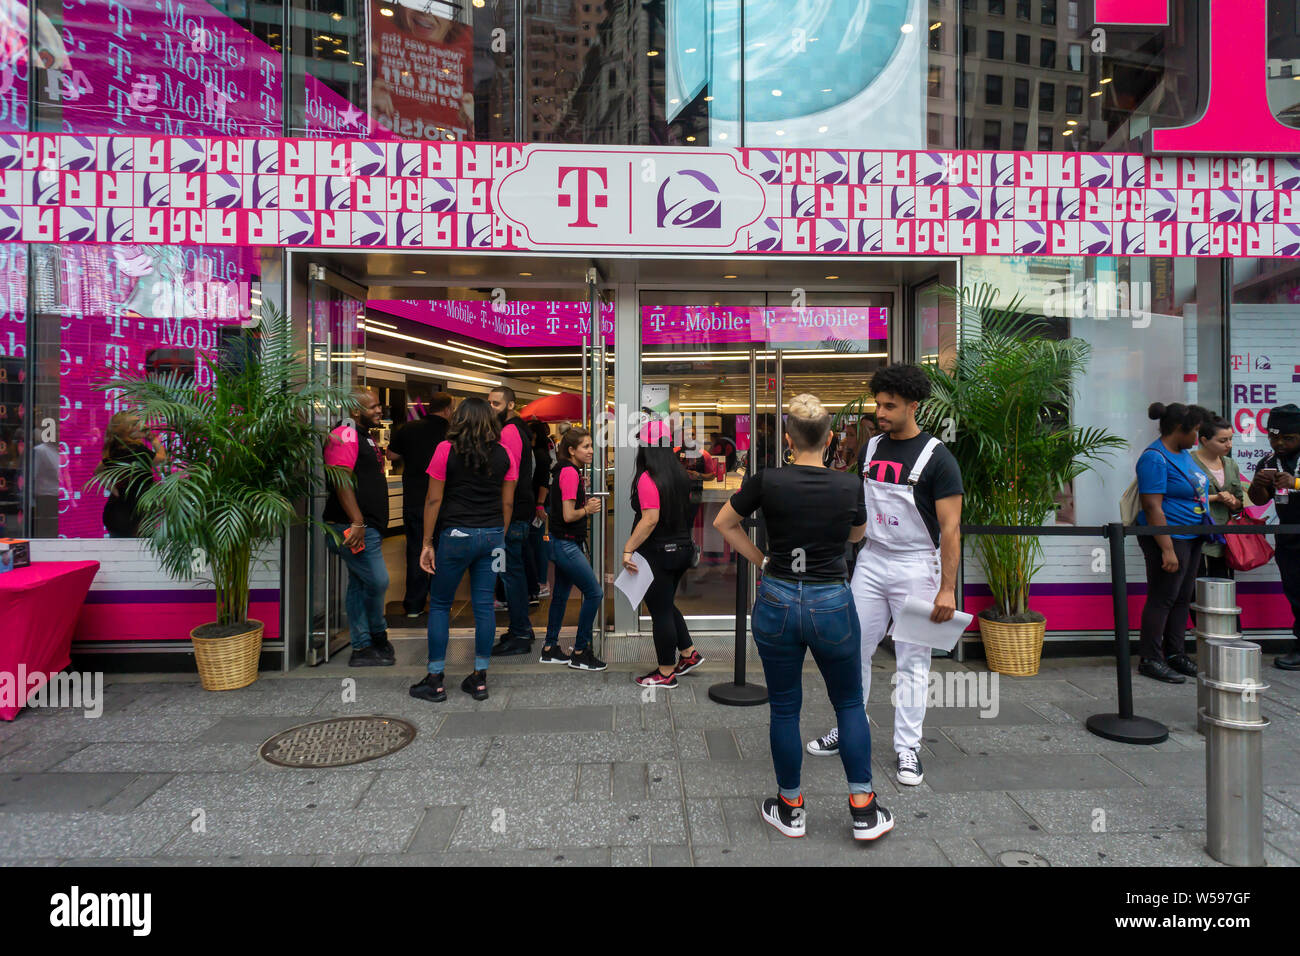 Hundreds of taco lovers descend on the T-Mobile store in Times Square in New York on Taco Tuesday, July 23, 2019 for TacoBell tacos, T-MoBell Freeze slushies and assorted free swag. The collaboration with Taco Bell rebranded the stores as ÒT-MoBellÓ. The crossover event takes over the store for three days bringing in the mobile phone loving, taco eating demographic. (© Richard B. Levine) Stock Photo